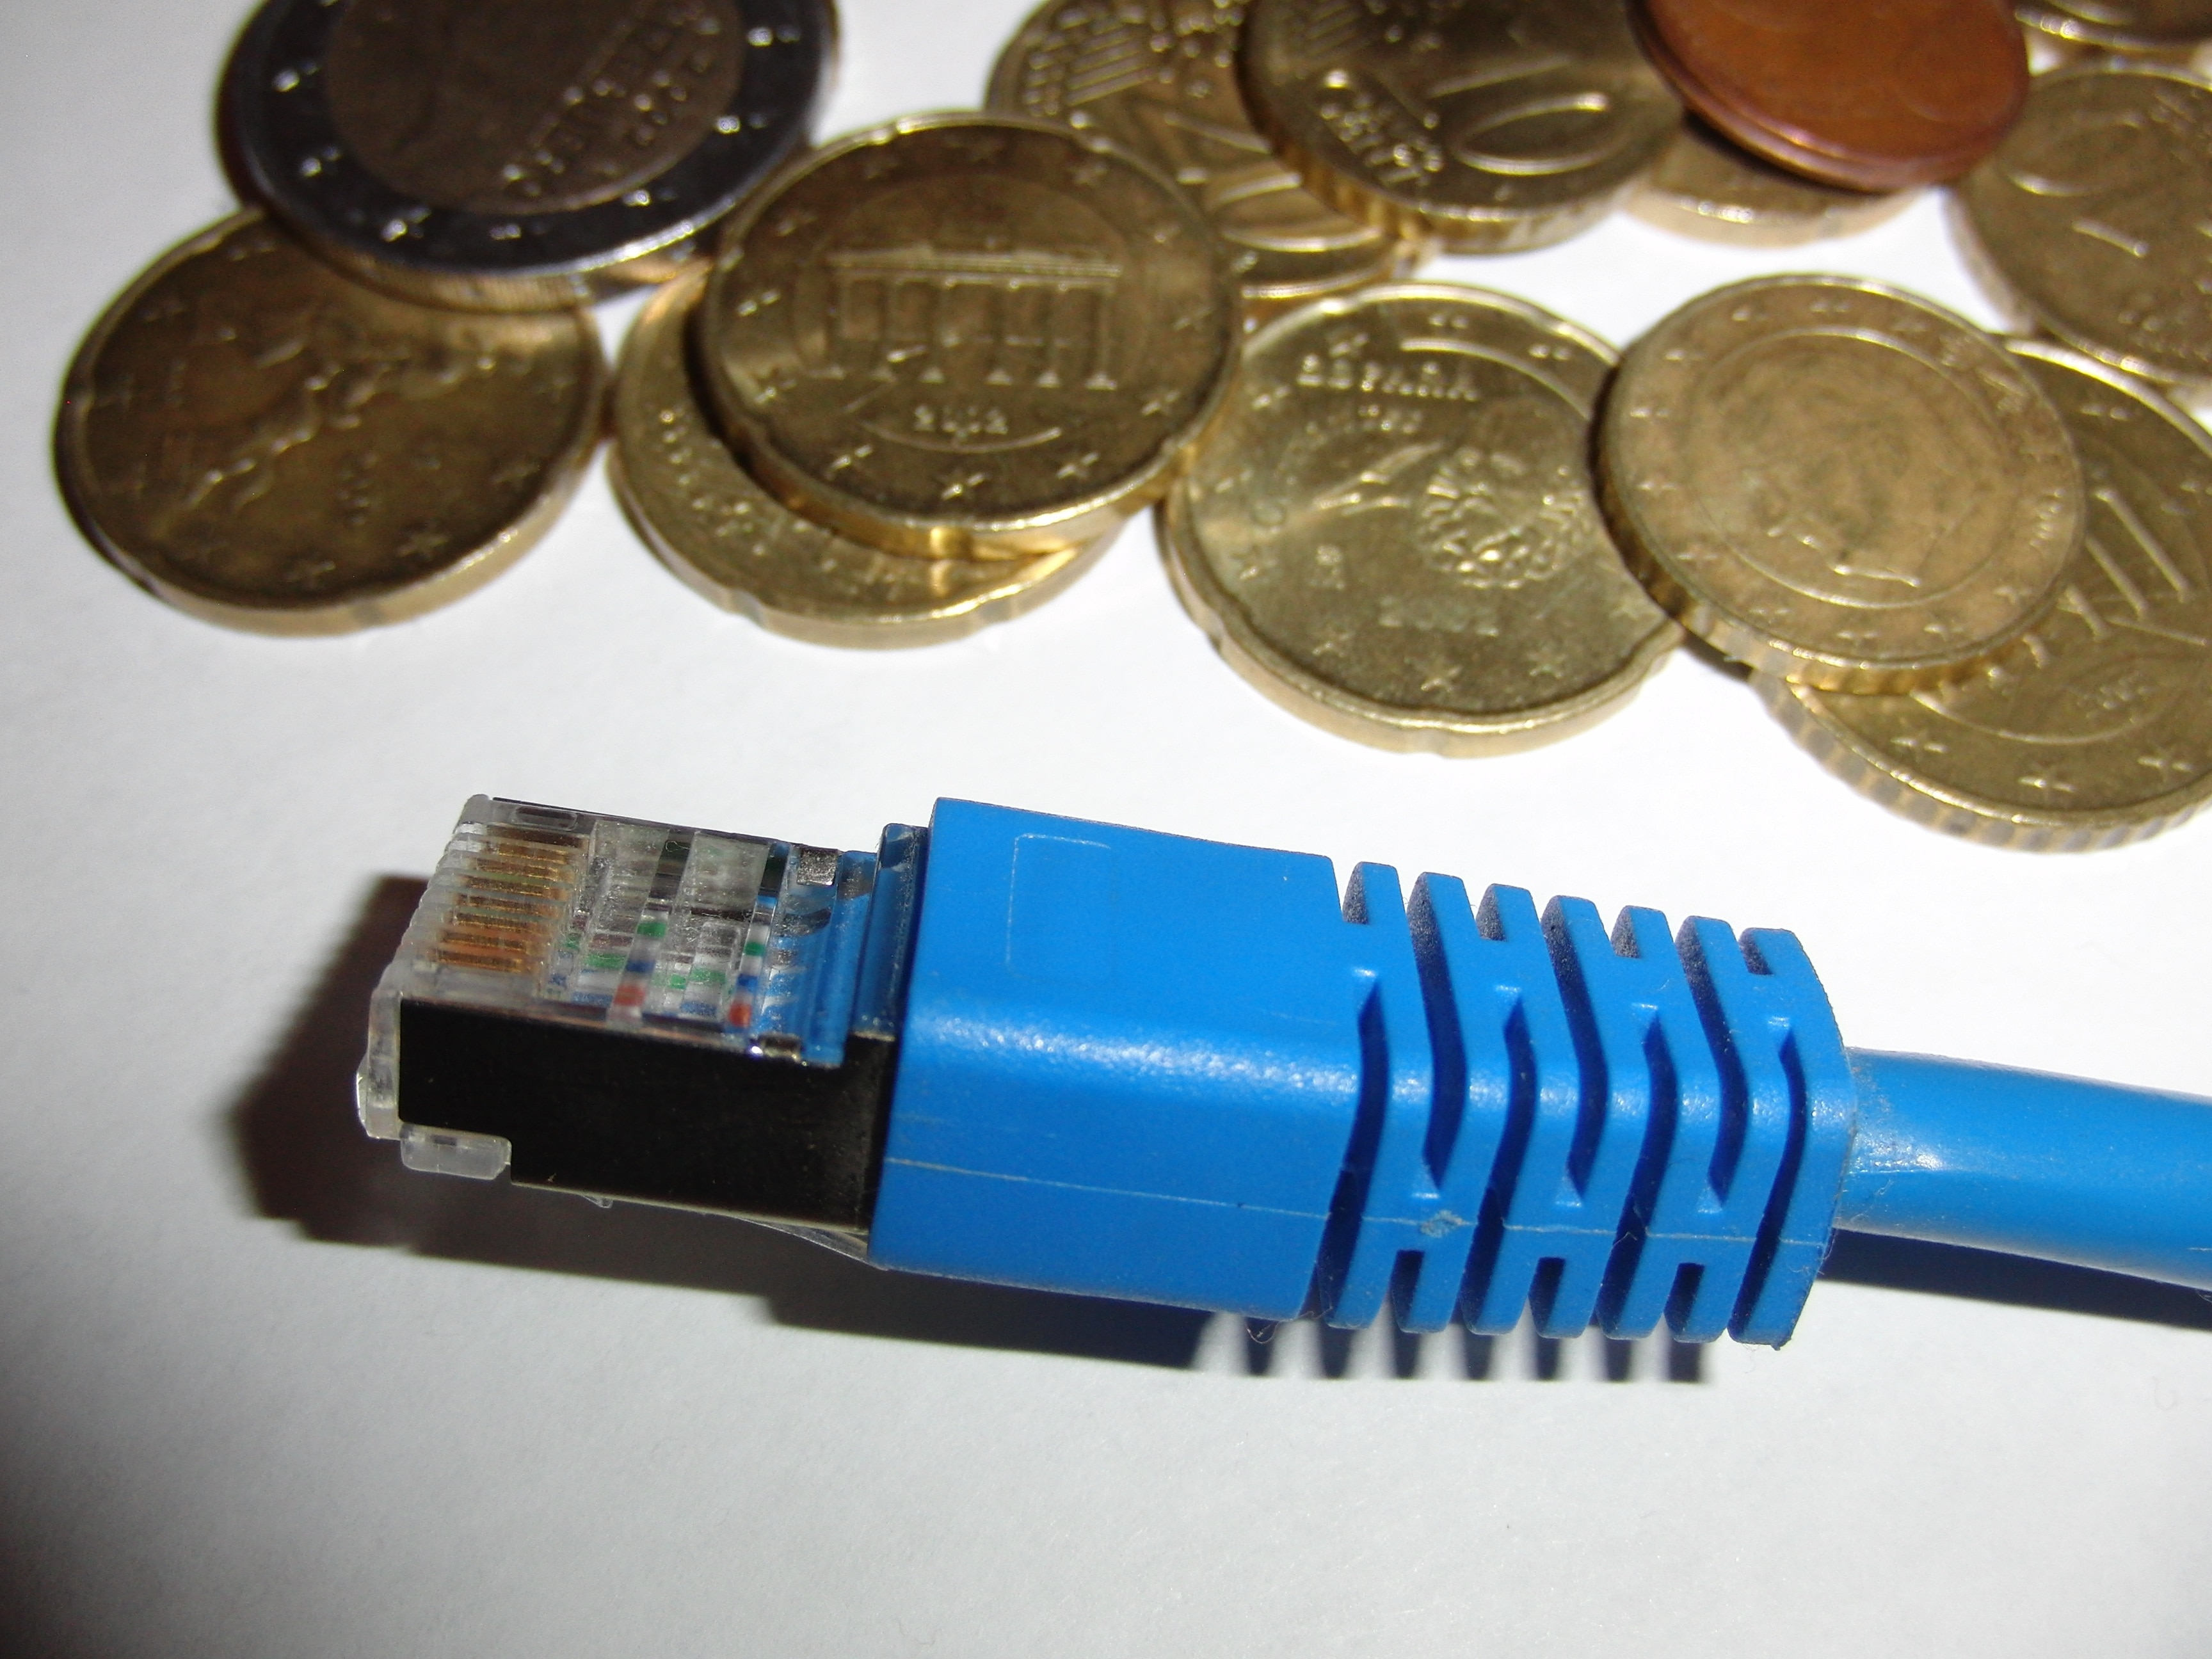 blue ethernet cable near coins